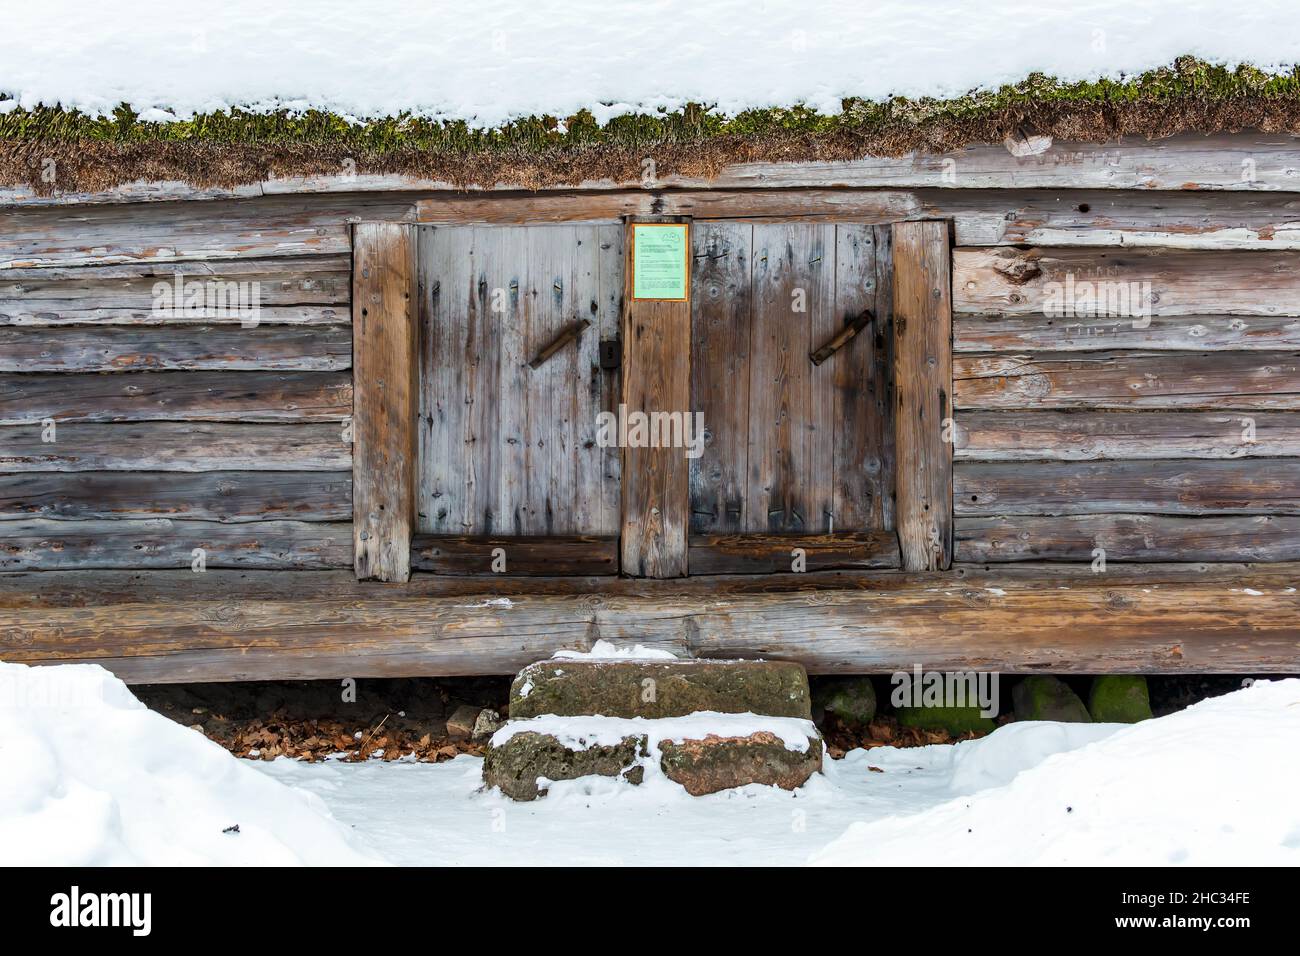 Two doors of Vidzeme two-part granary under snow Stock Photo